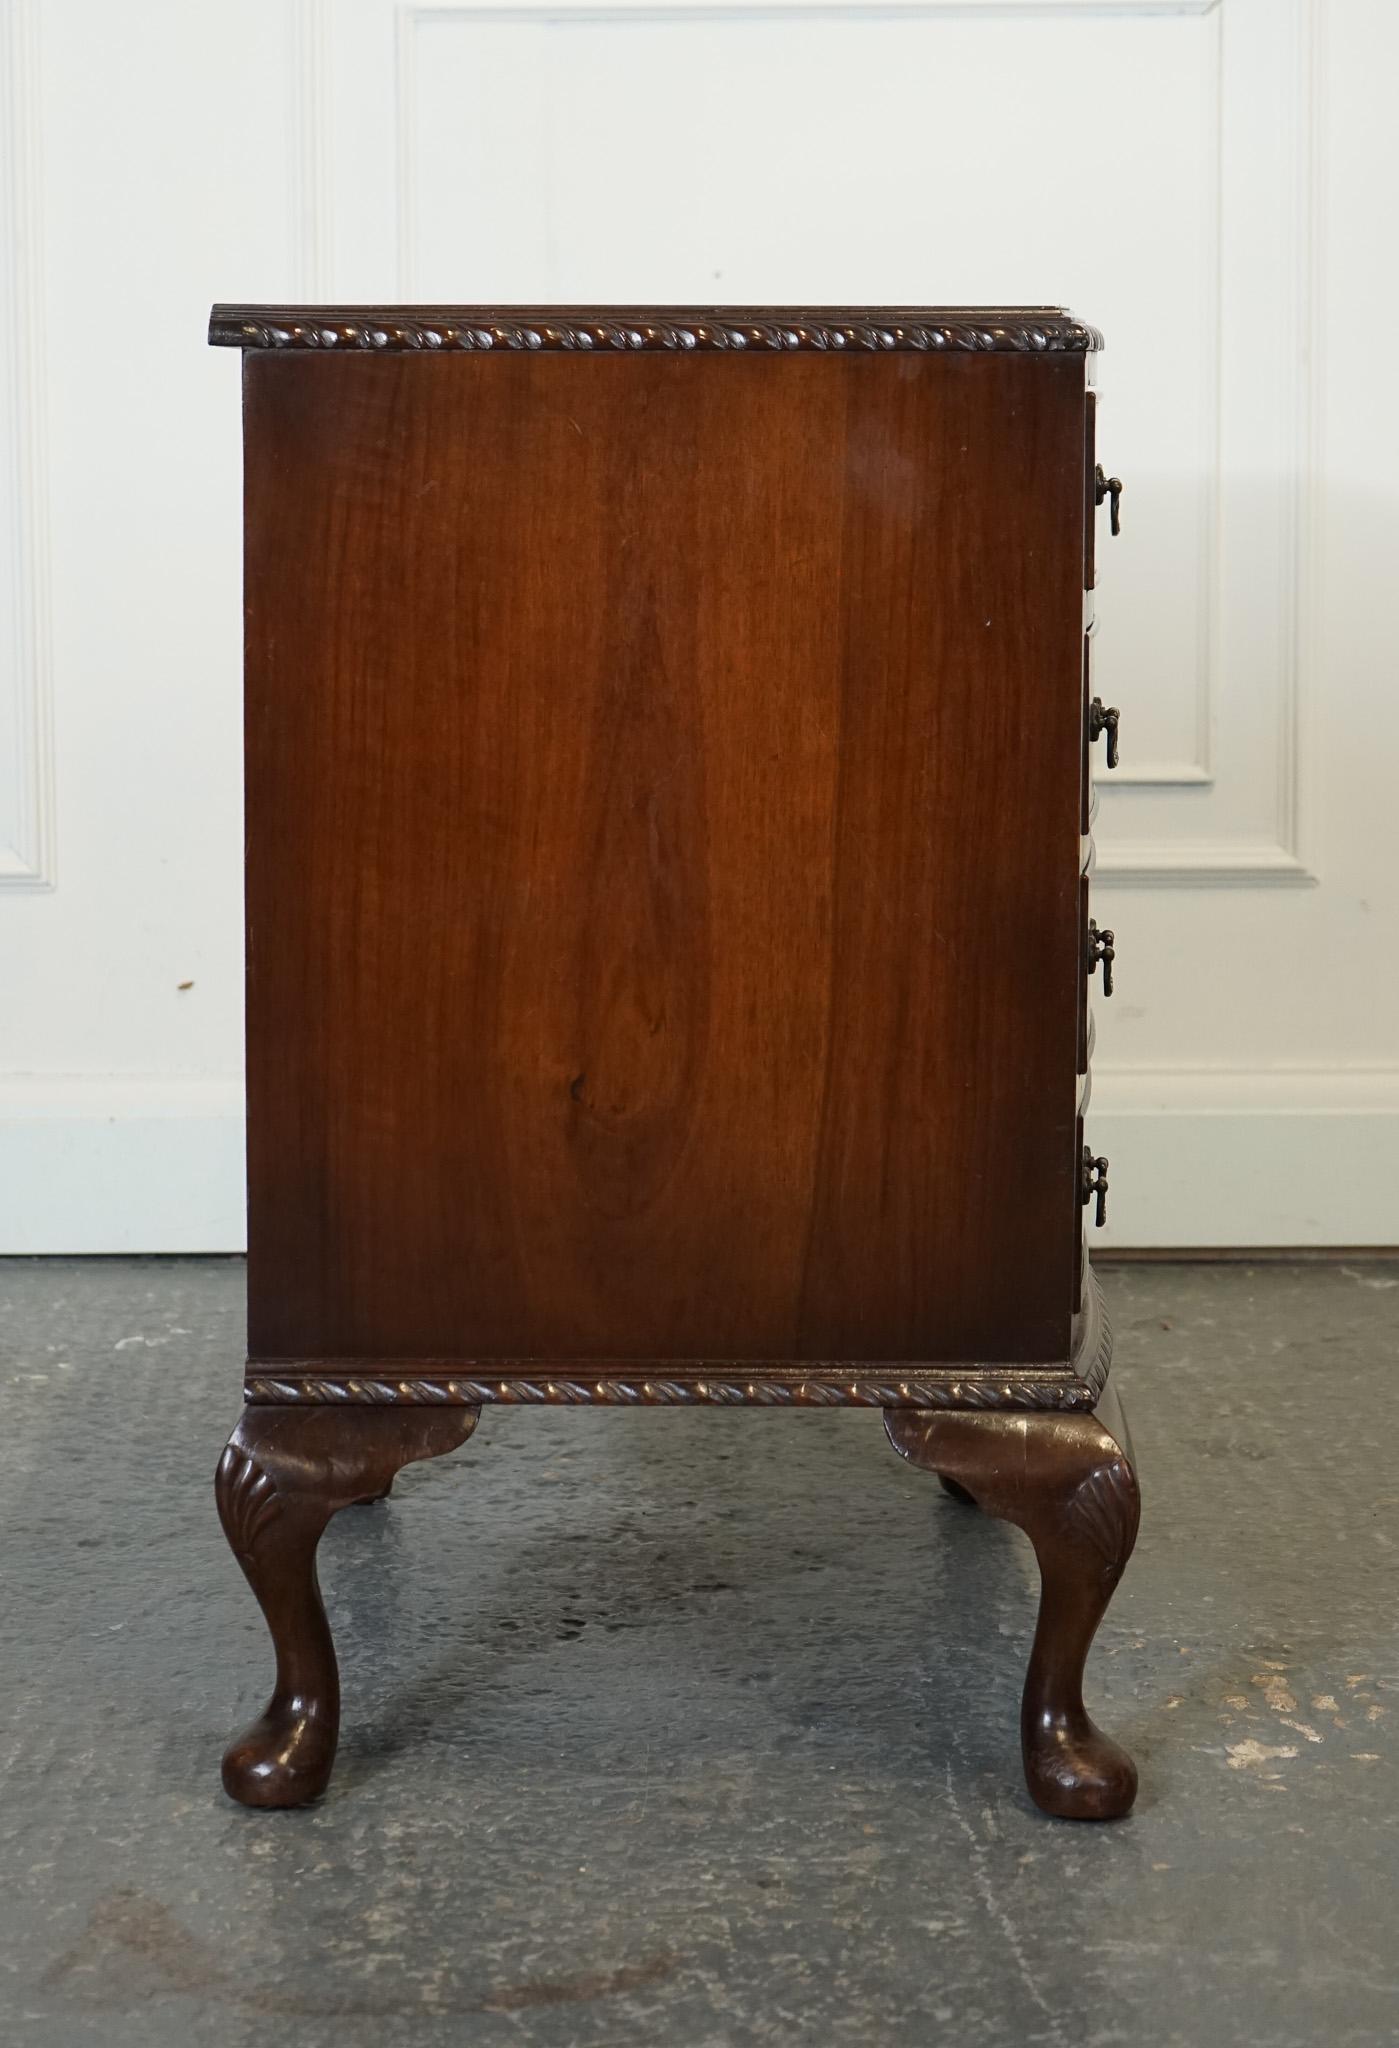 FIGURED VICTORIAN WALNUT BOW FRONTED CHEST OF DRAWERS RAisted ON QUEEN ANNE LEGS im Angebot 3